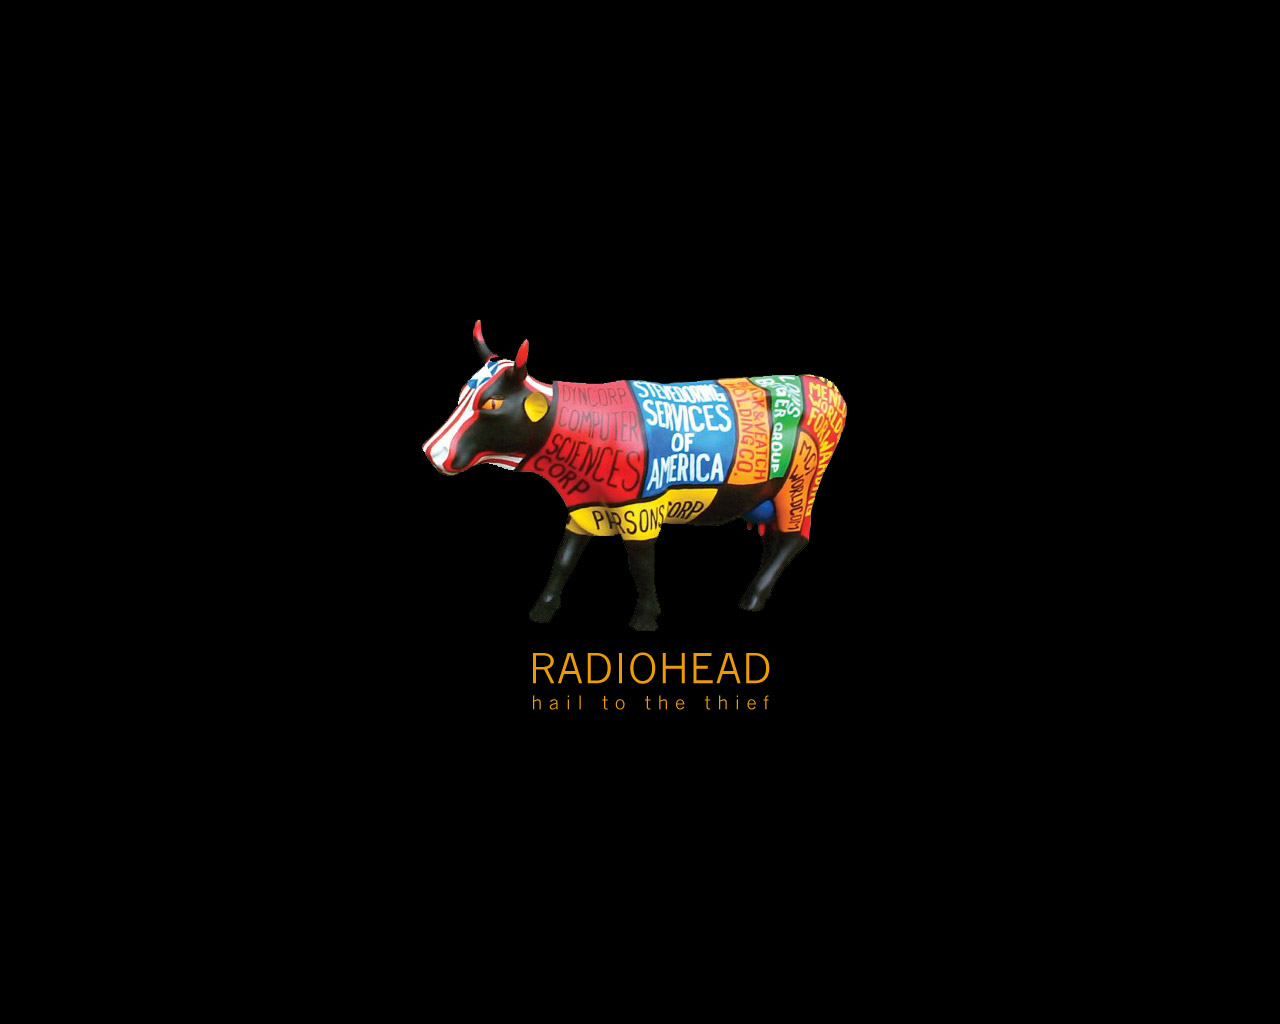 Free Download Radiohead Bandswallpapers Wallpapers Music Wallpaper 1280x1024 For Your Desktop Mobile Tablet Explore 47 Radiohead Desktop Wallpaper Radiohead Wallpaper 19x1080 Radiohead Wallpaper 1080p